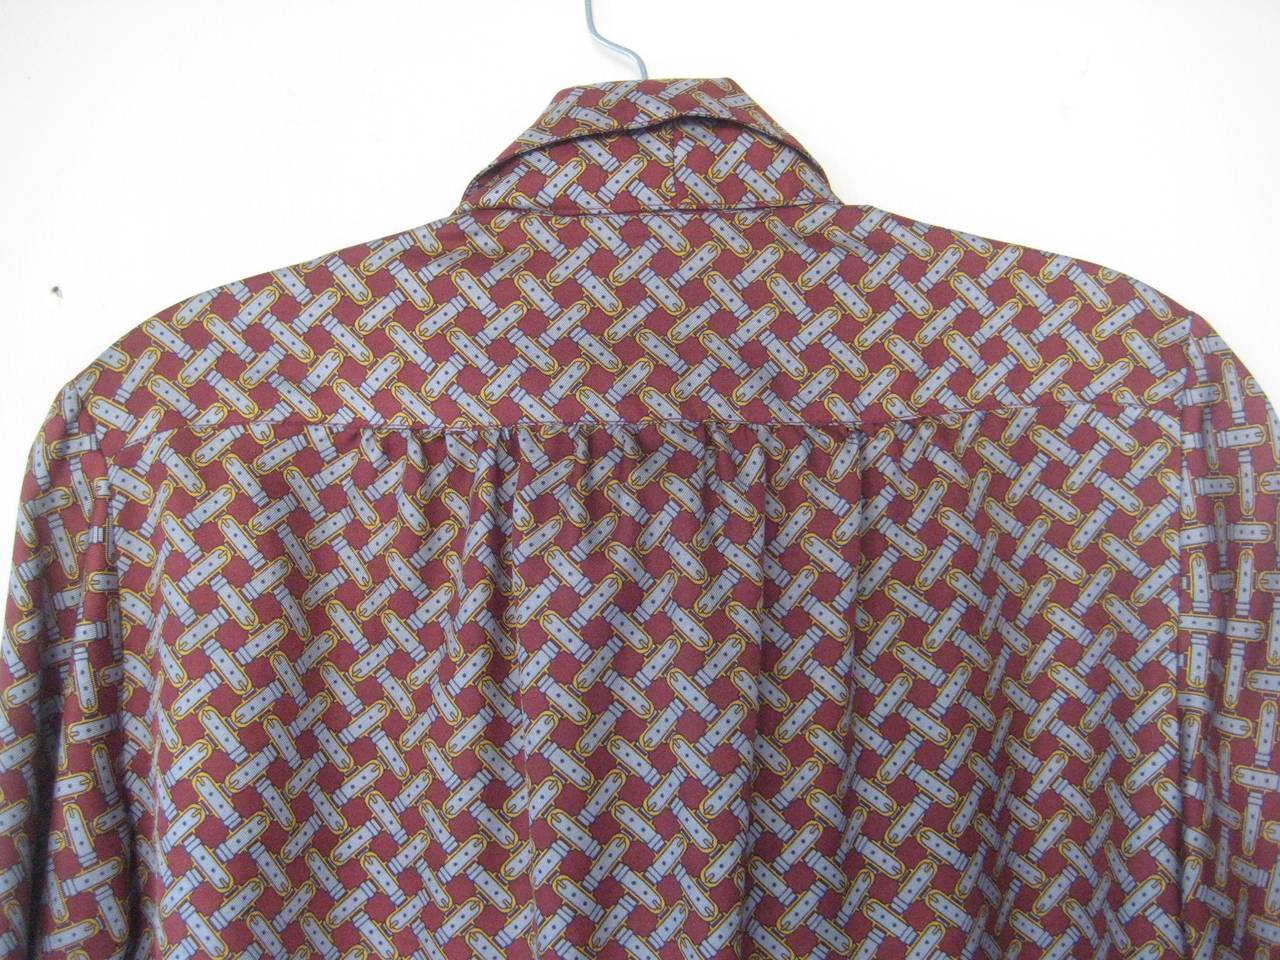 Vintage Hermes Buckle Print Blouse with Matching Twilly Tie For Sale 3